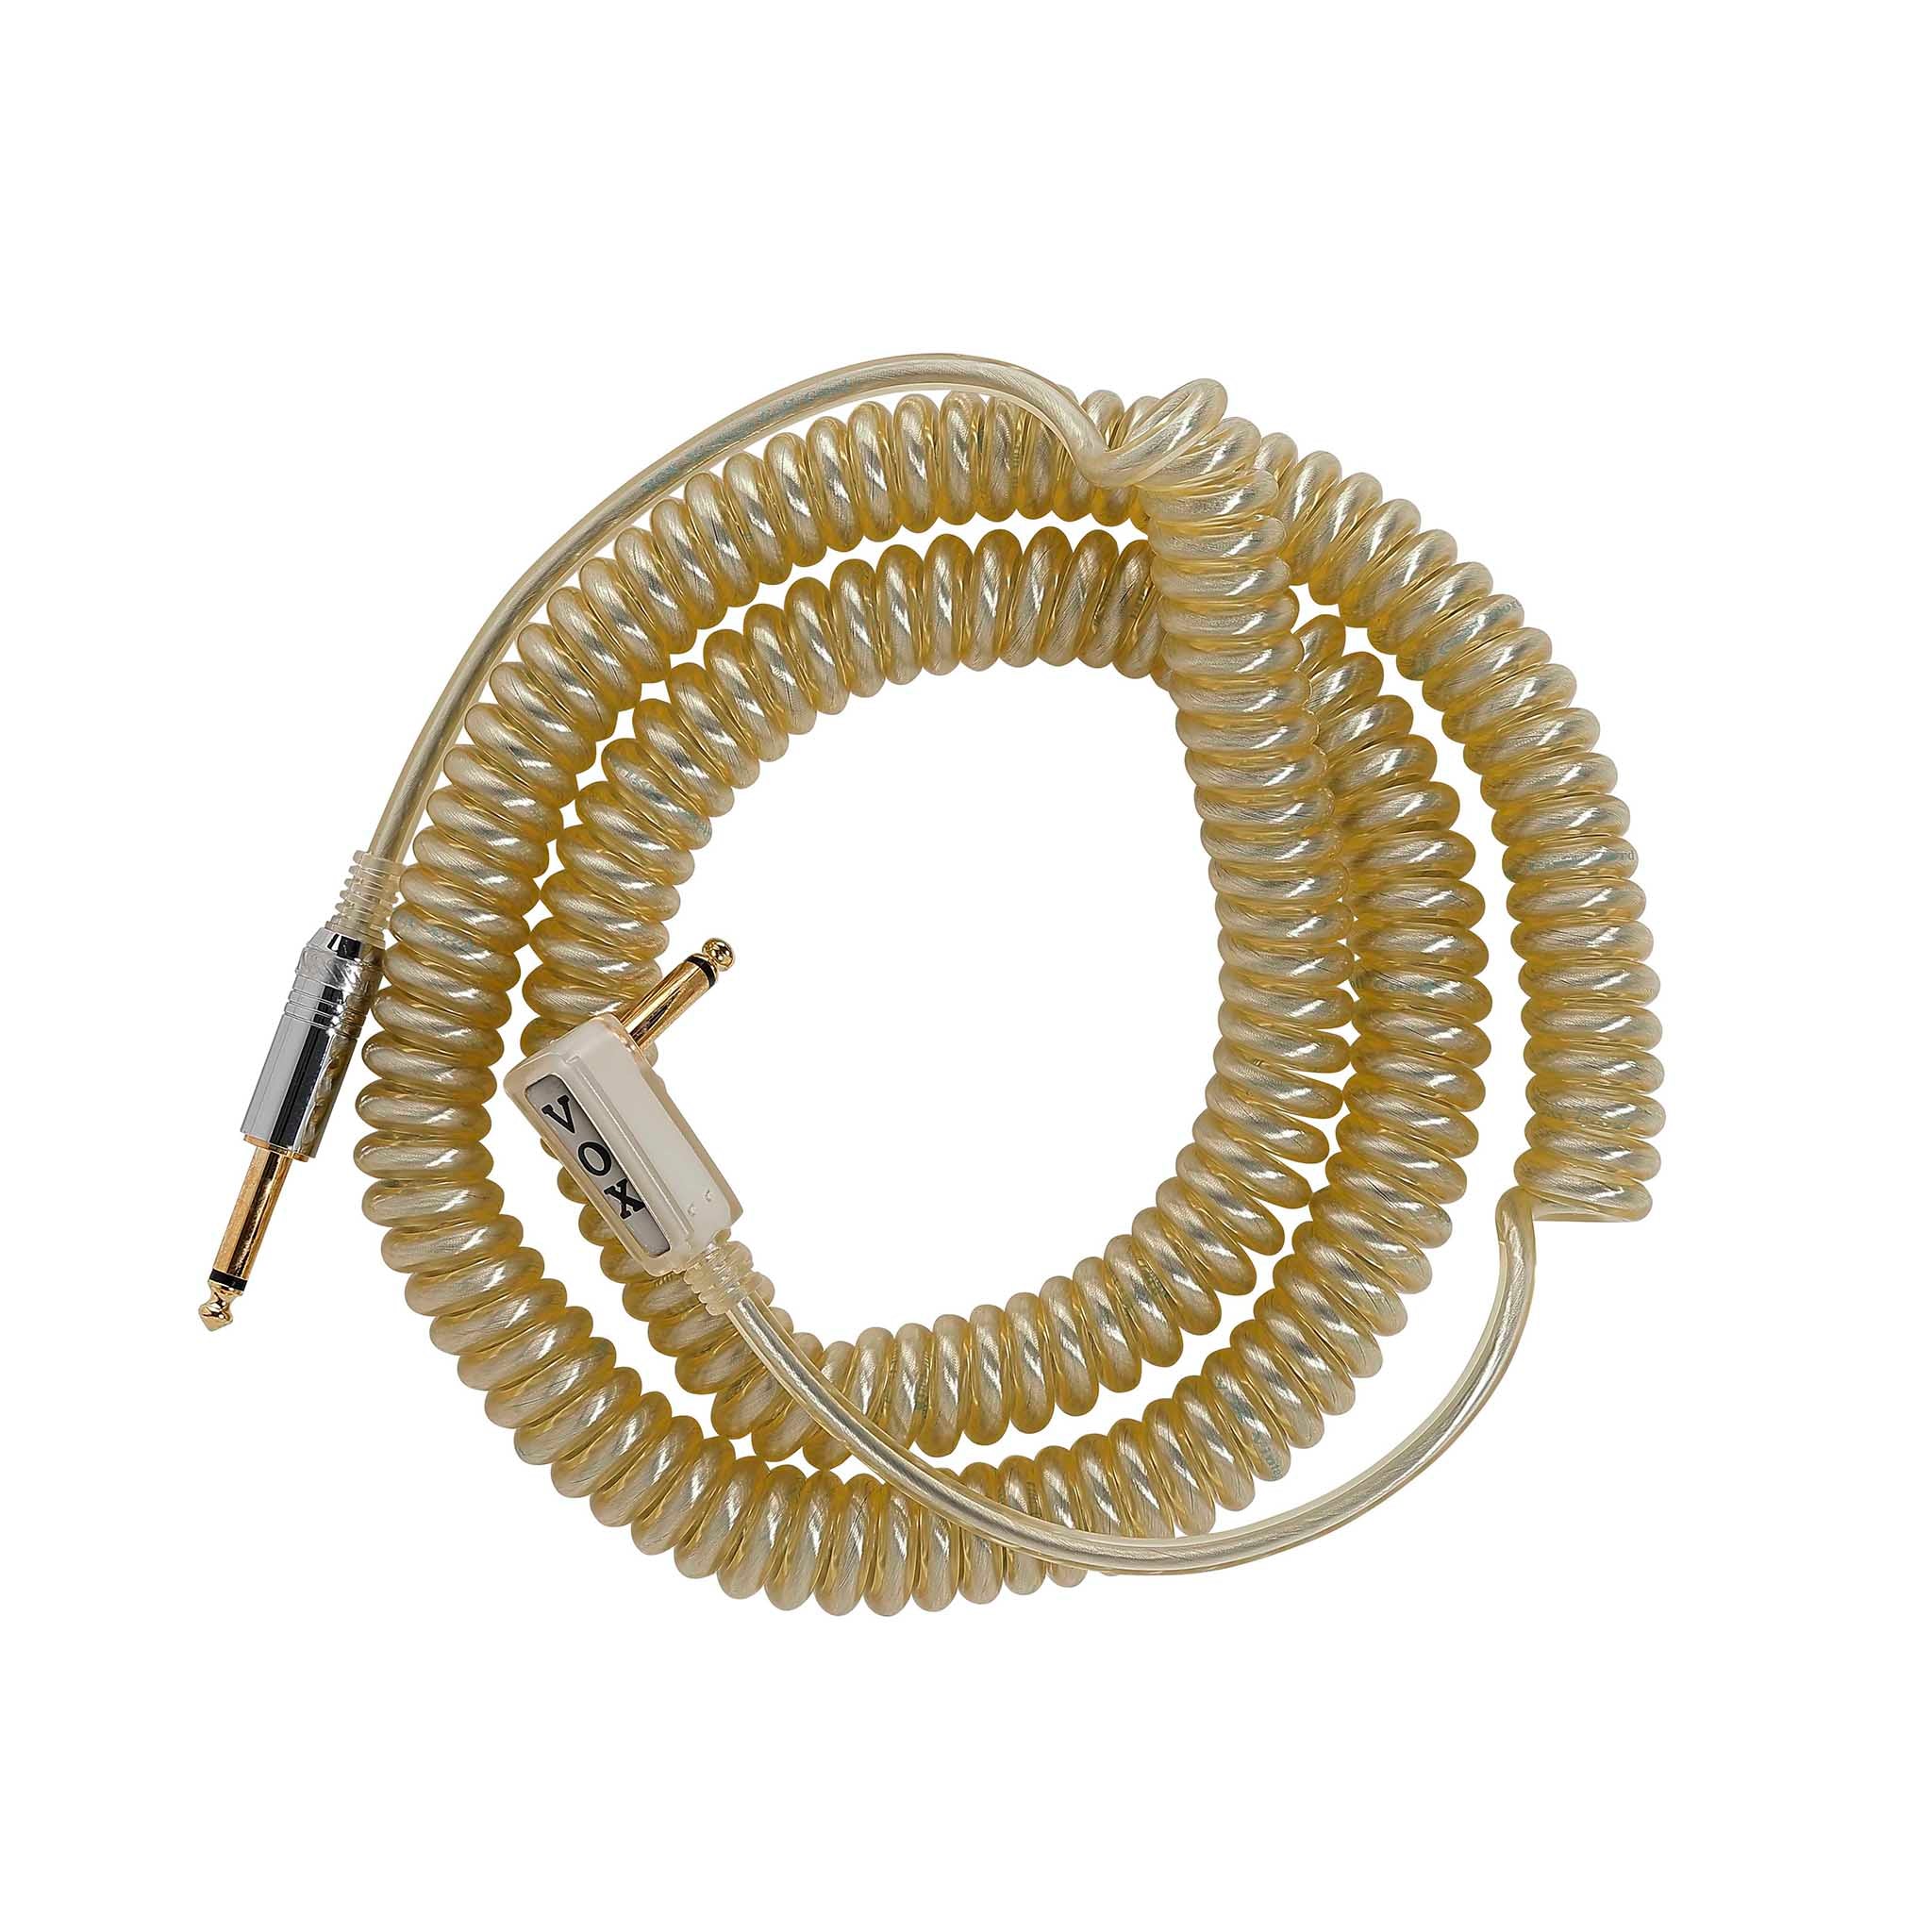 Vox Vintage Coiled Cable 4